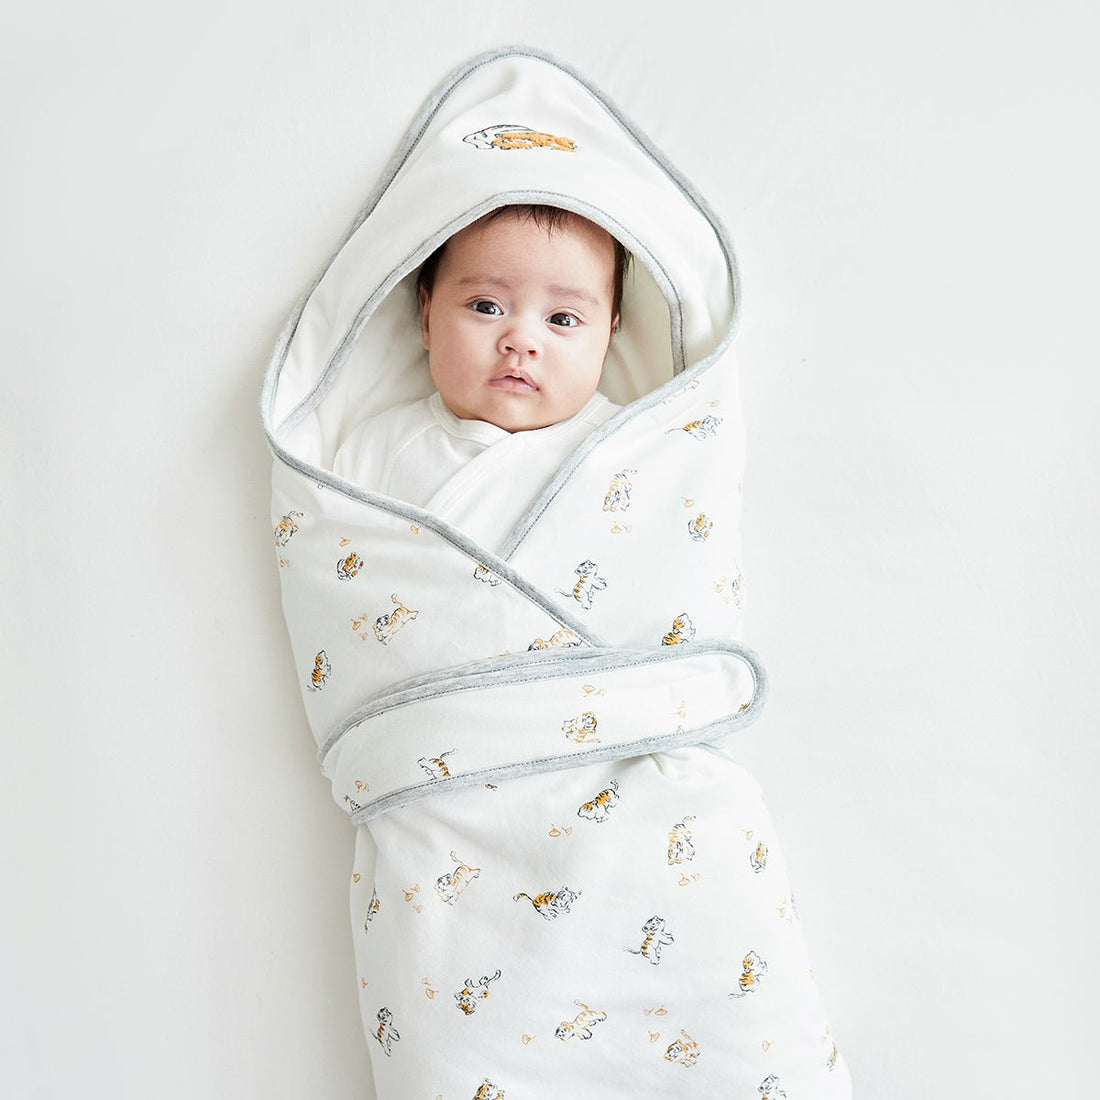 Lively Tiger Comfort Cotton Baby White Swaddle Wrap - 0cm